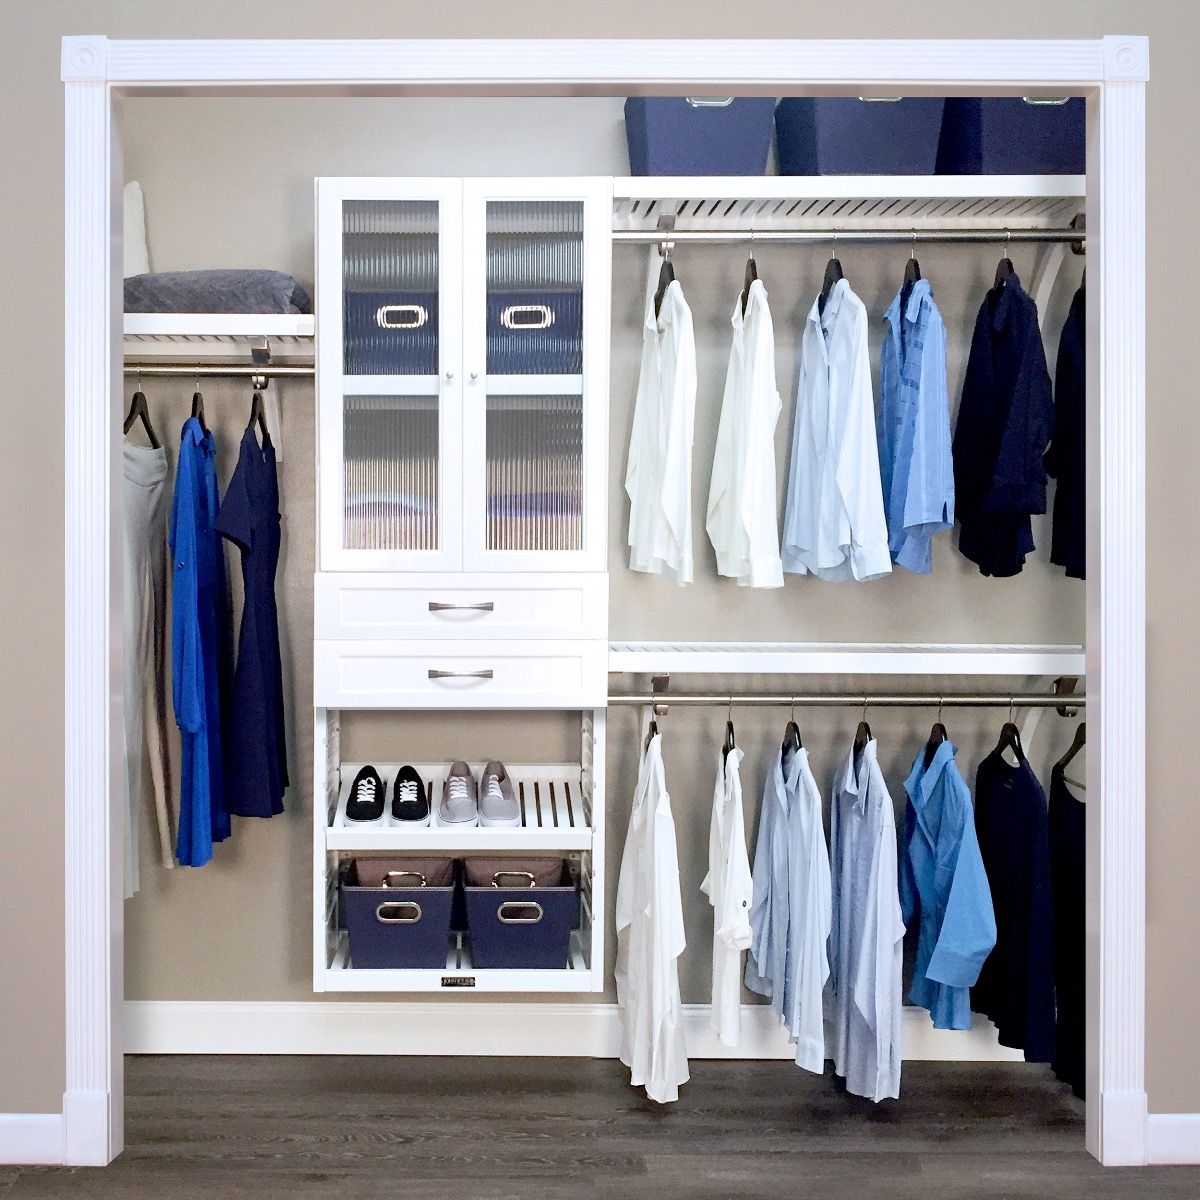 16in. Deep Woodcrest White Deluxe Closet Organizer with 2 drawers and doors